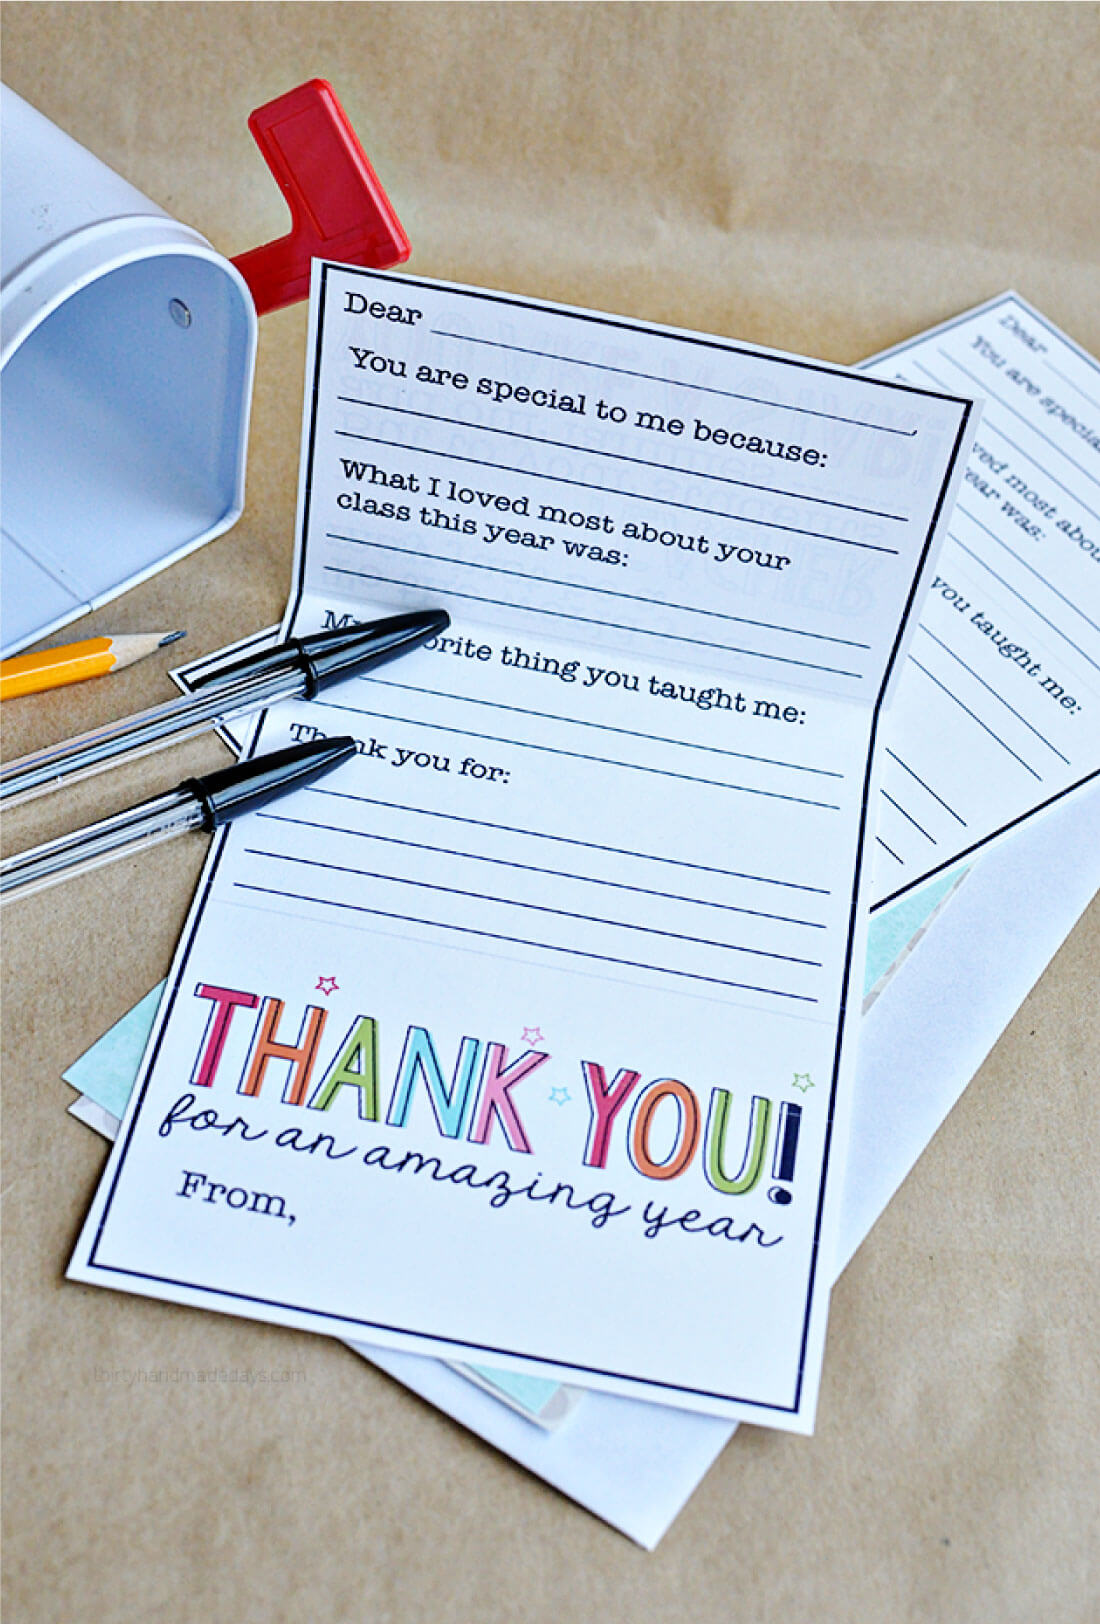 Gifts for Teacher Appreciation Week Gift Card Template from 30daysblog